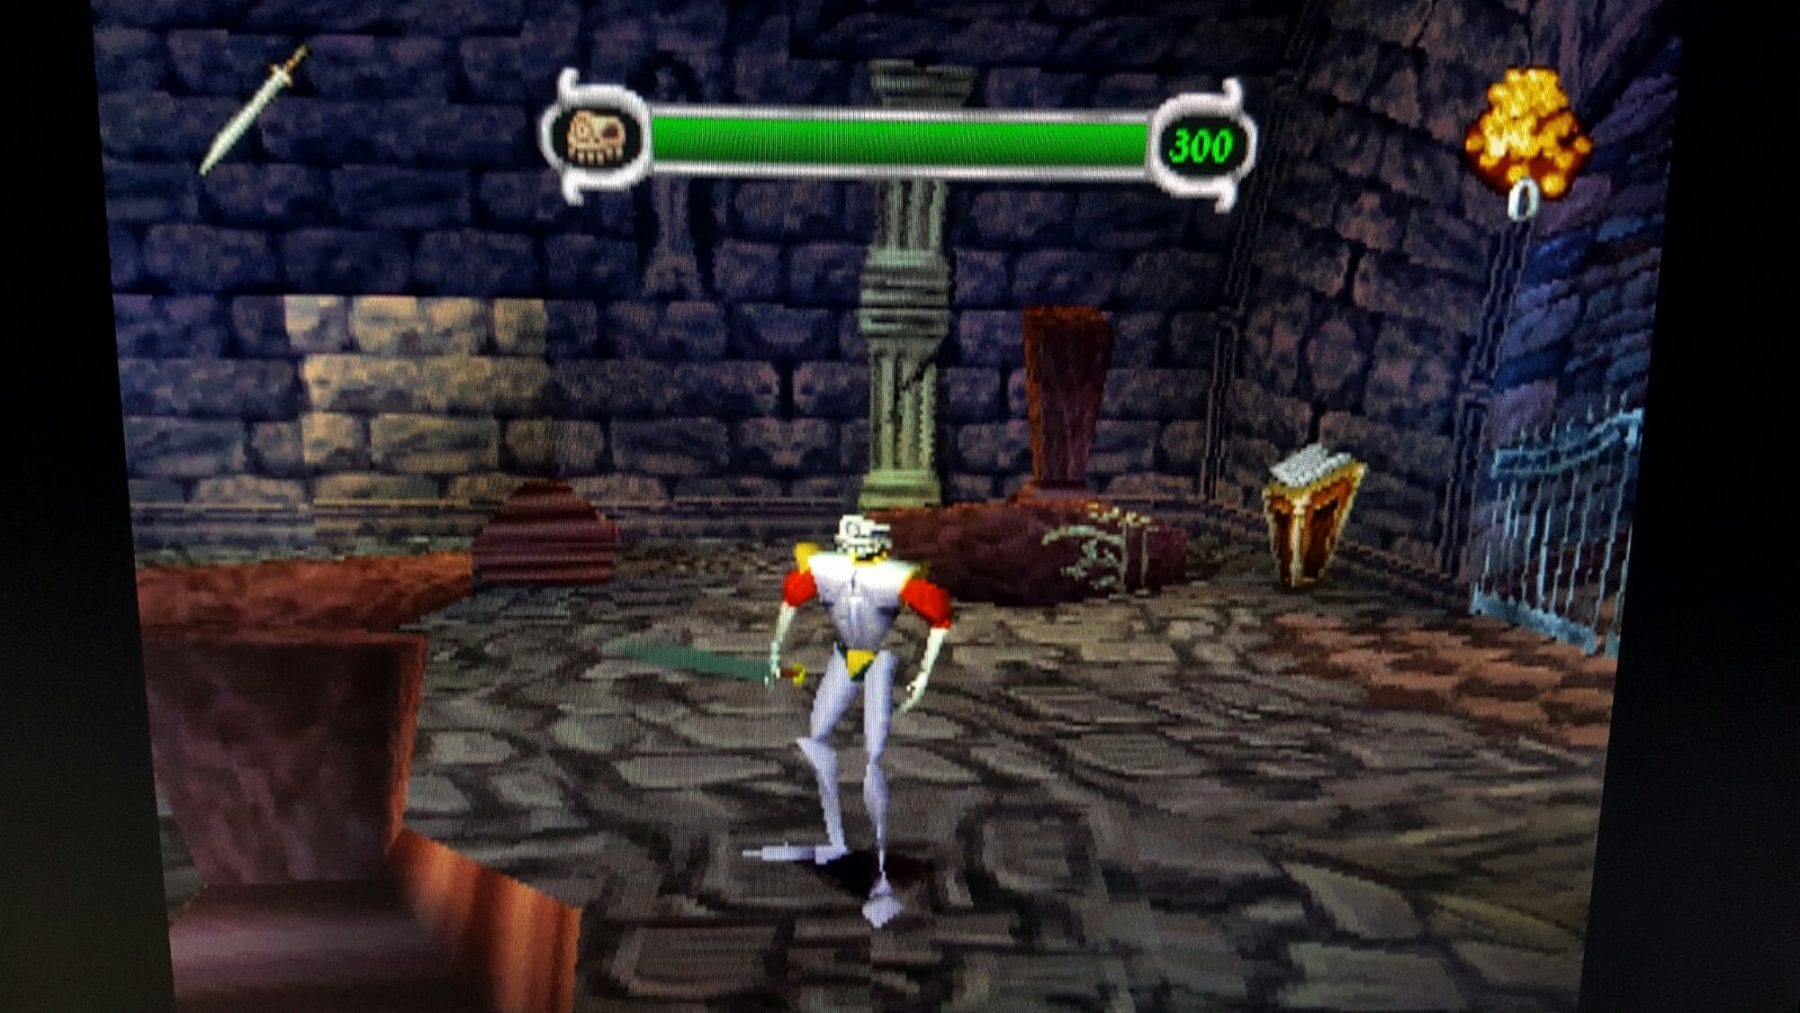 Gameplay image from the original PS1 game MediEvil